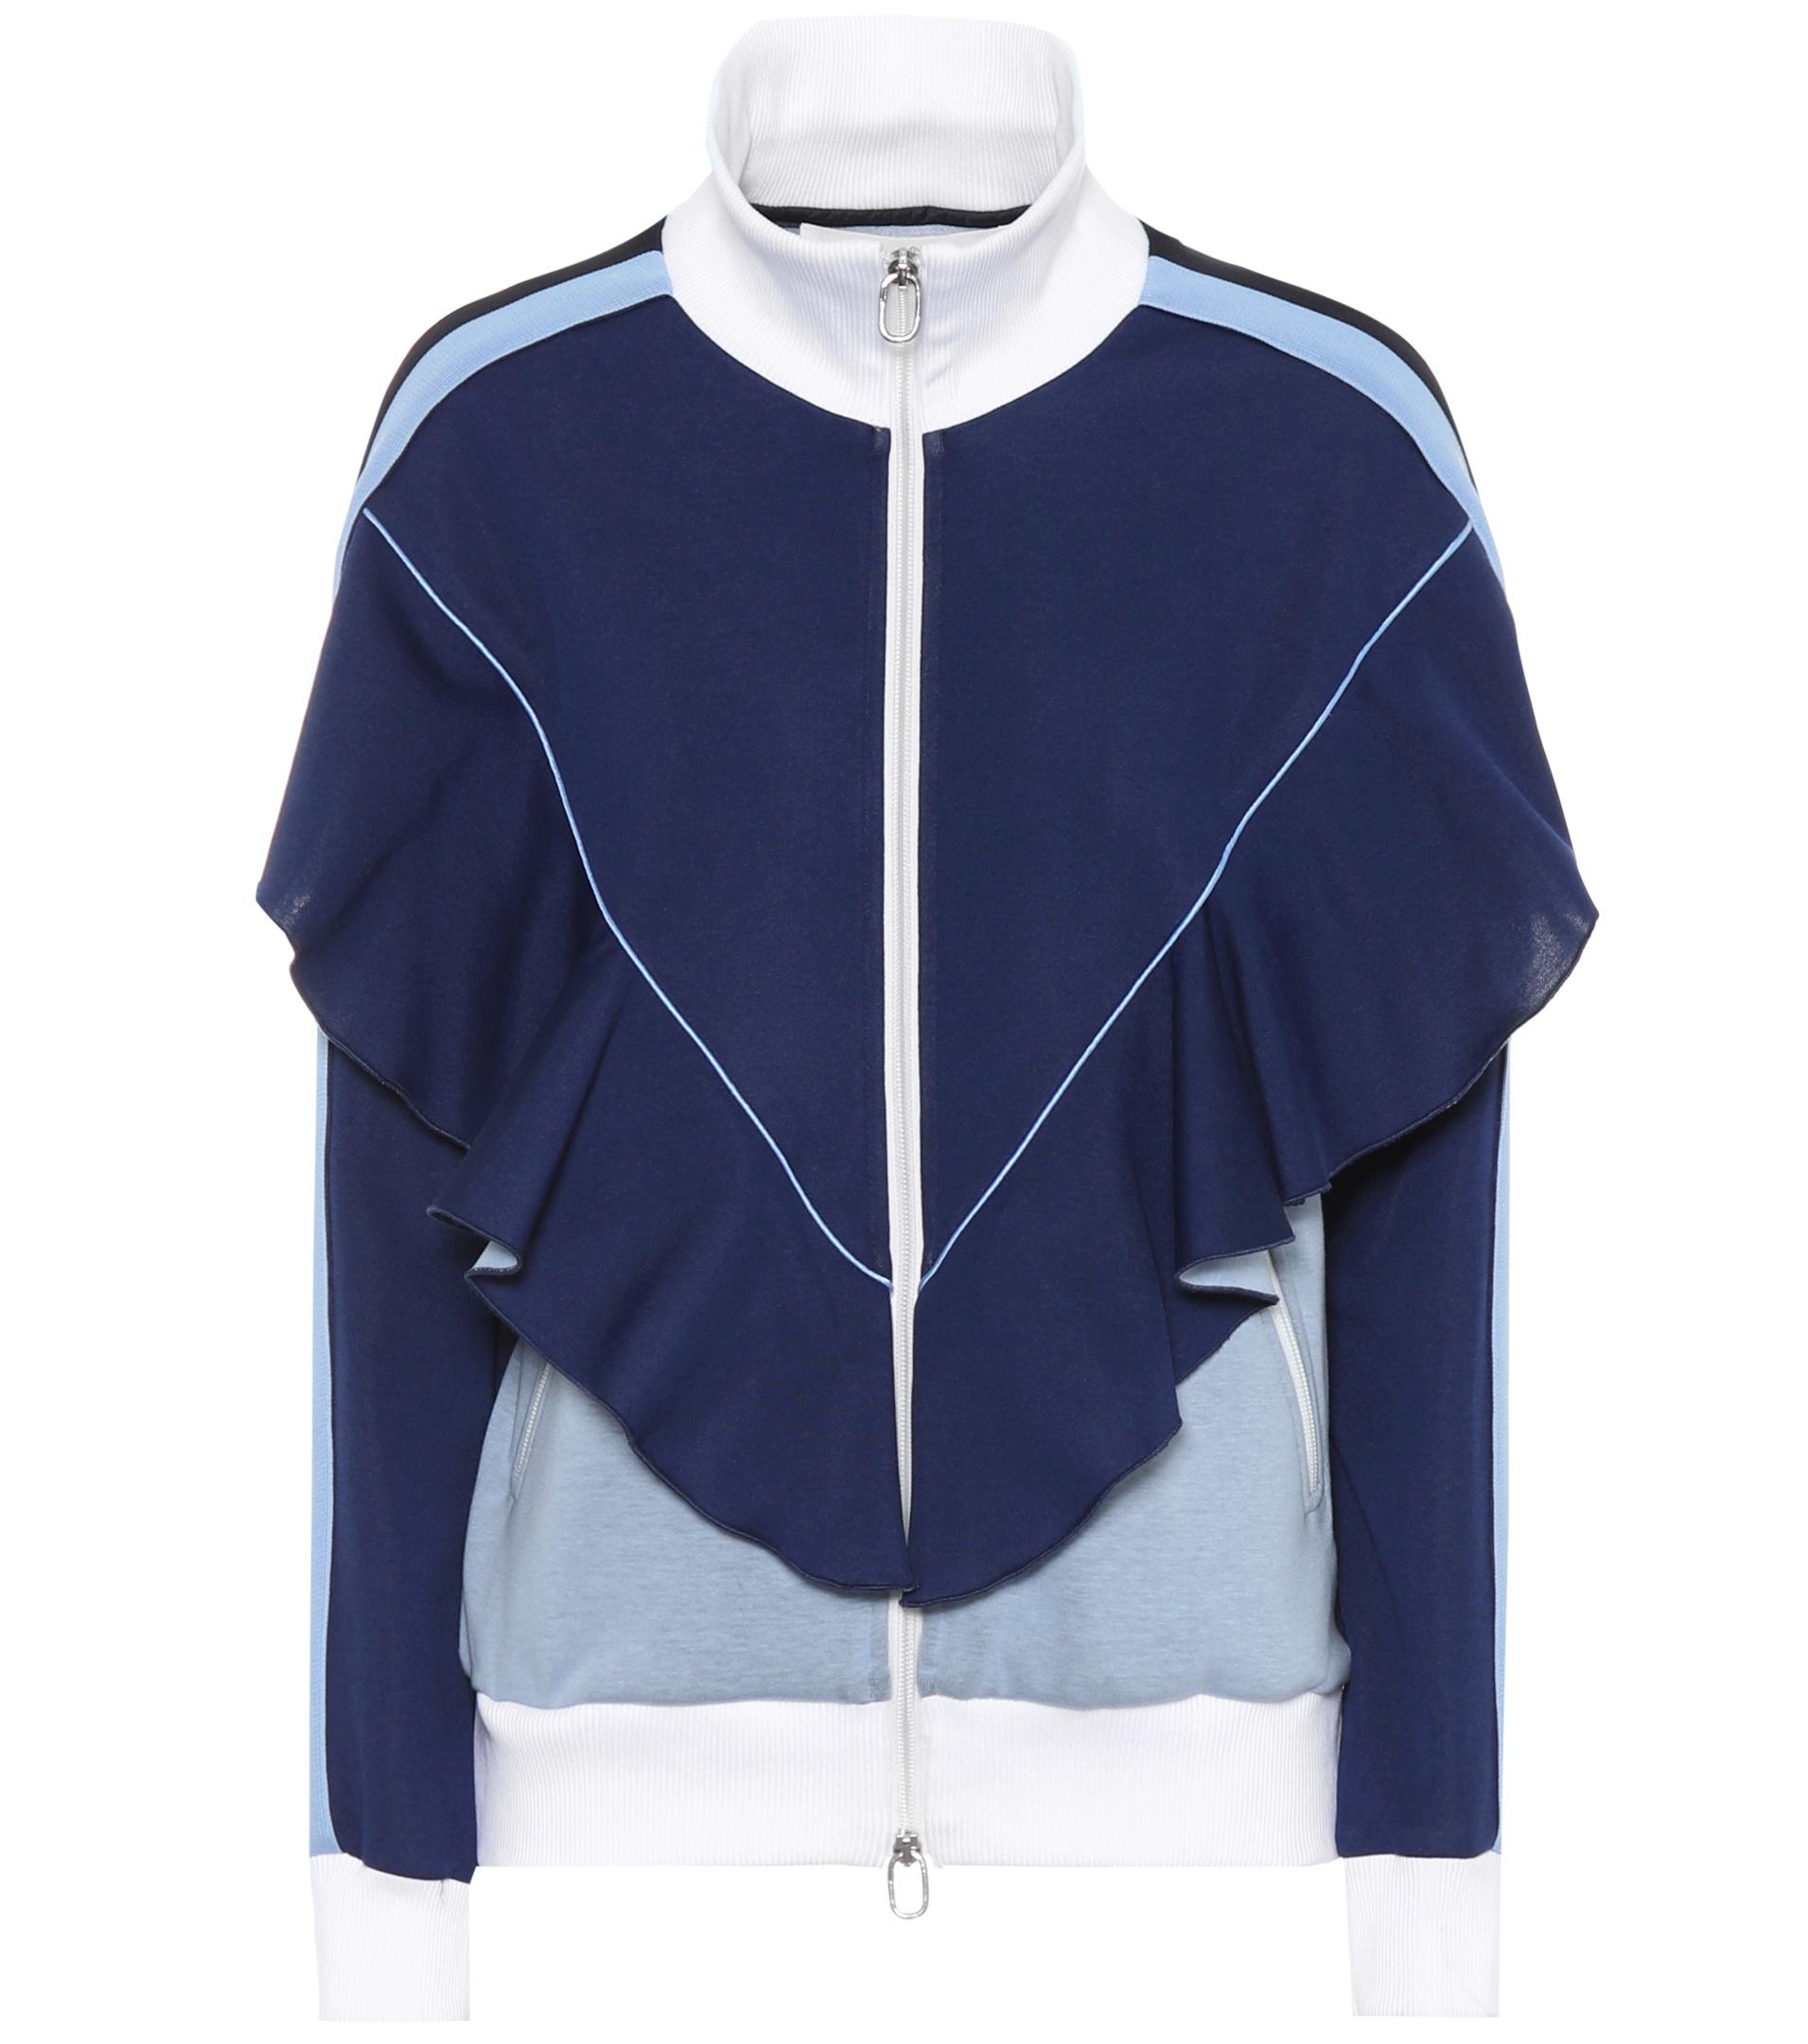 Golden Goose Deluxe Brand Sylvia Cotton-blend Jacket in Blue - Lyst